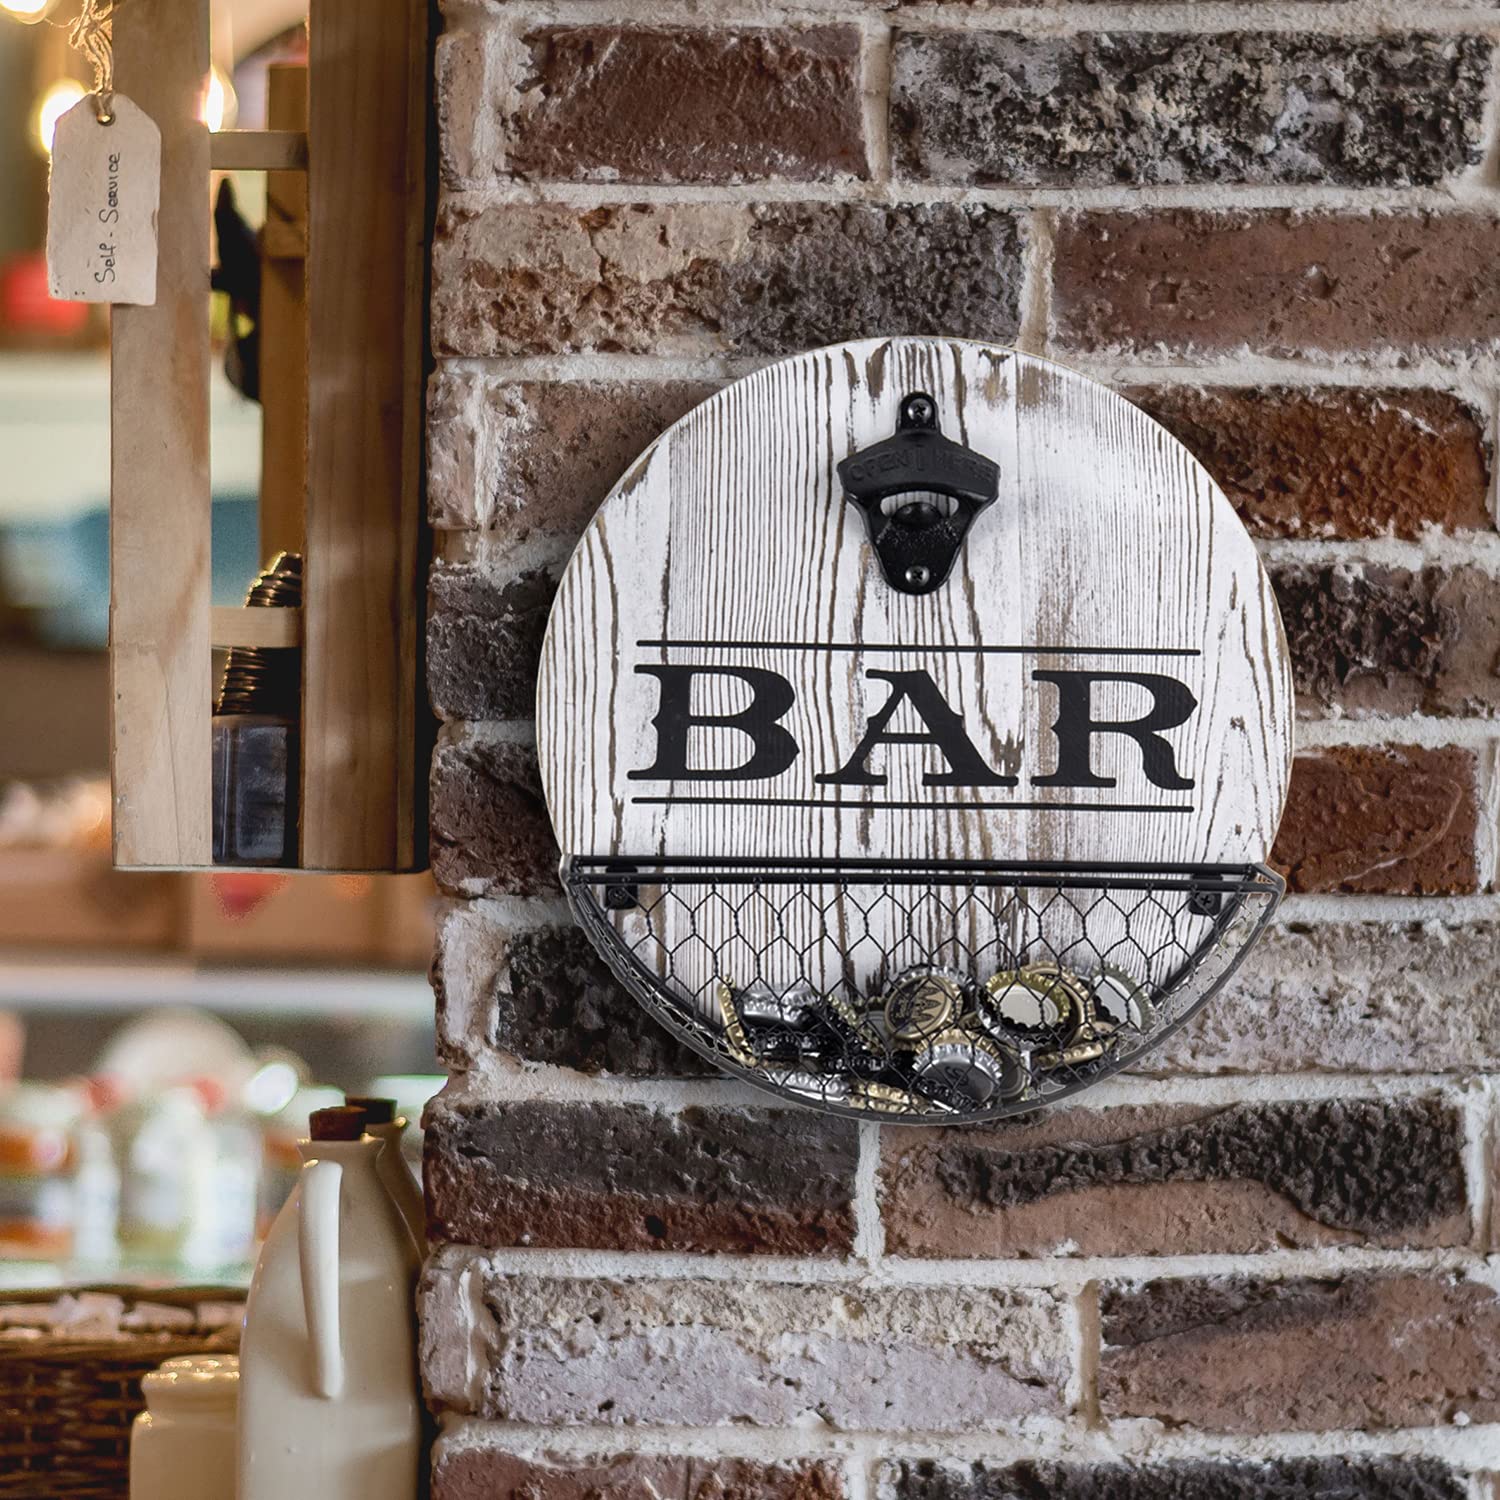 MyGift Vintage Bar Sign, Whitewashed Wood Wall Decor and Metal Bottle Opener and Mesh Wire Bottle Cap Catcher Basket